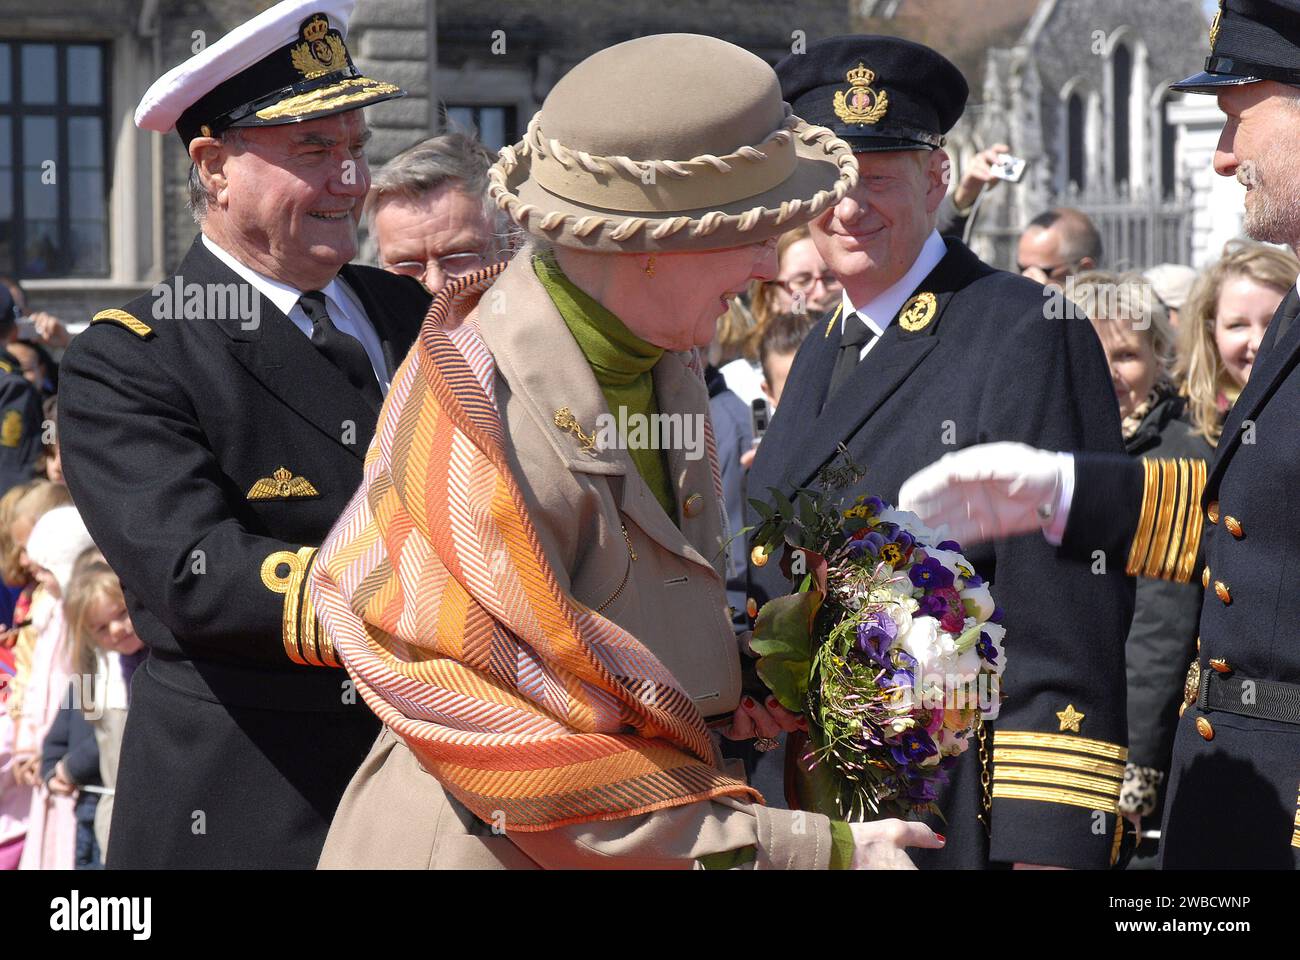 HM the Queen Margrethe II and husband prince Hnerik official on board Royal ship Danneborg as usual each year and royal couple will sail from Copenhagen to Hillingoer city and have lunch on ship today Friday April 28,2006 Copenhagen Denmark Stock Photo